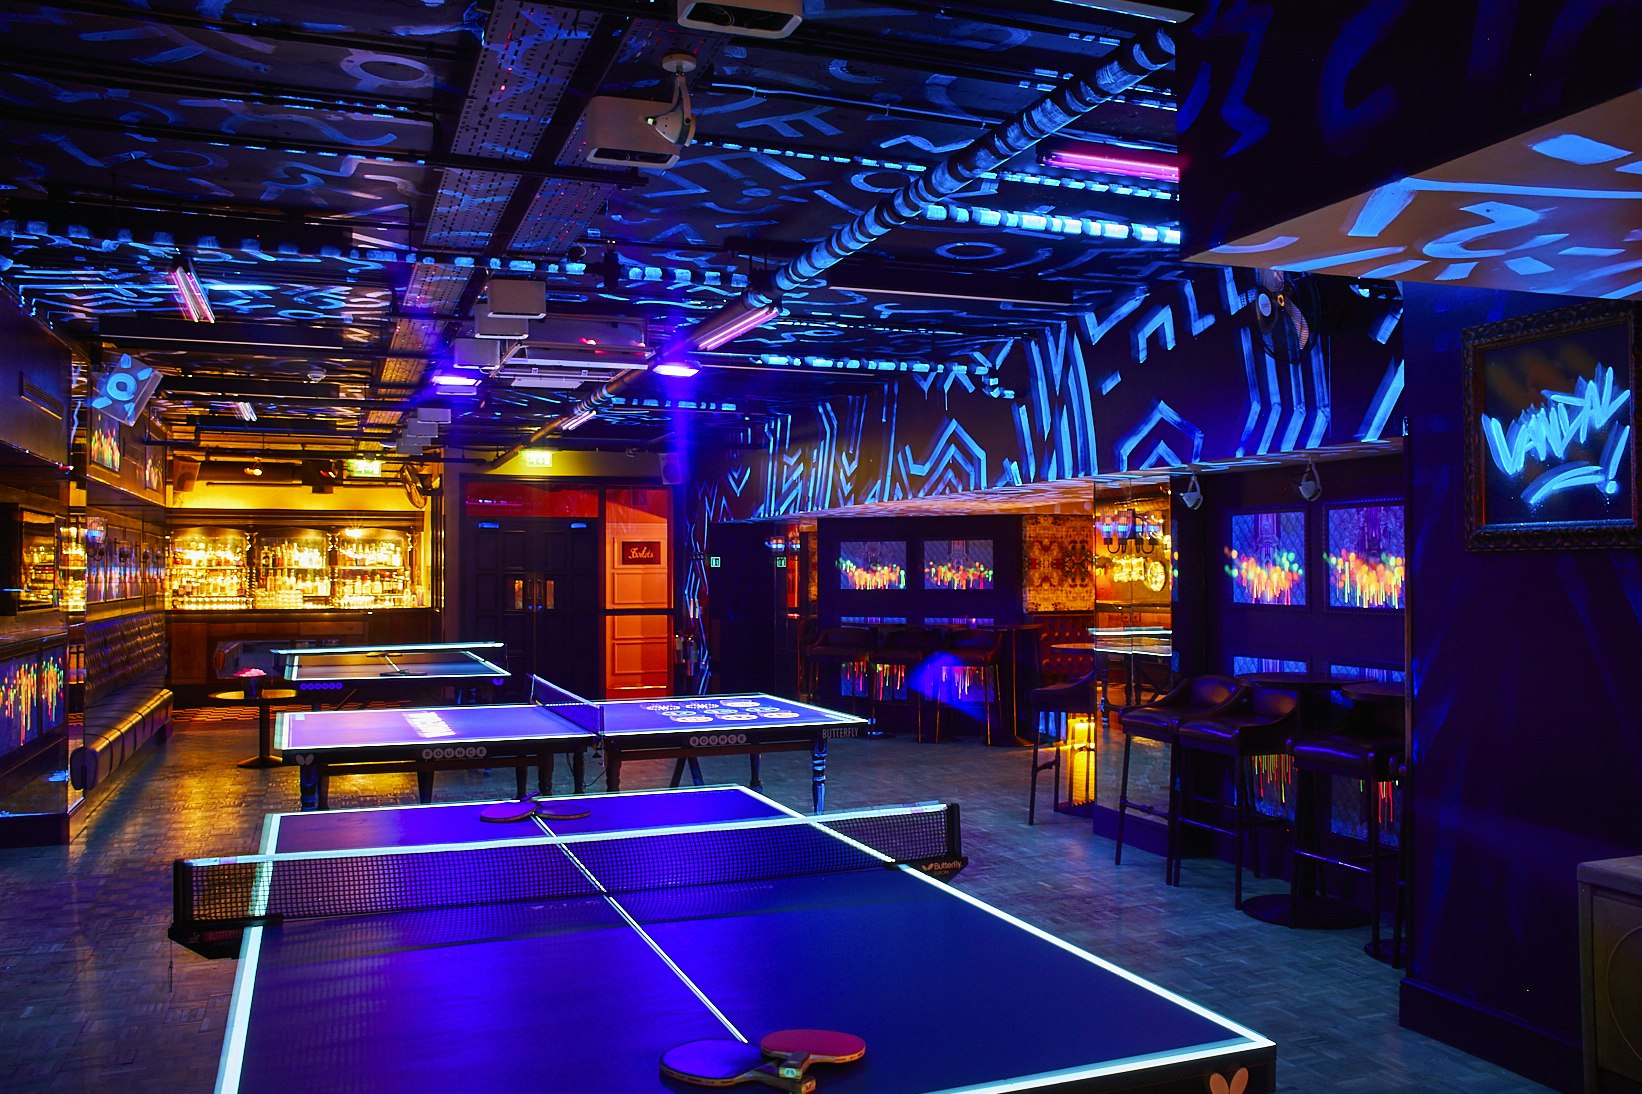 Bounce tables and bar